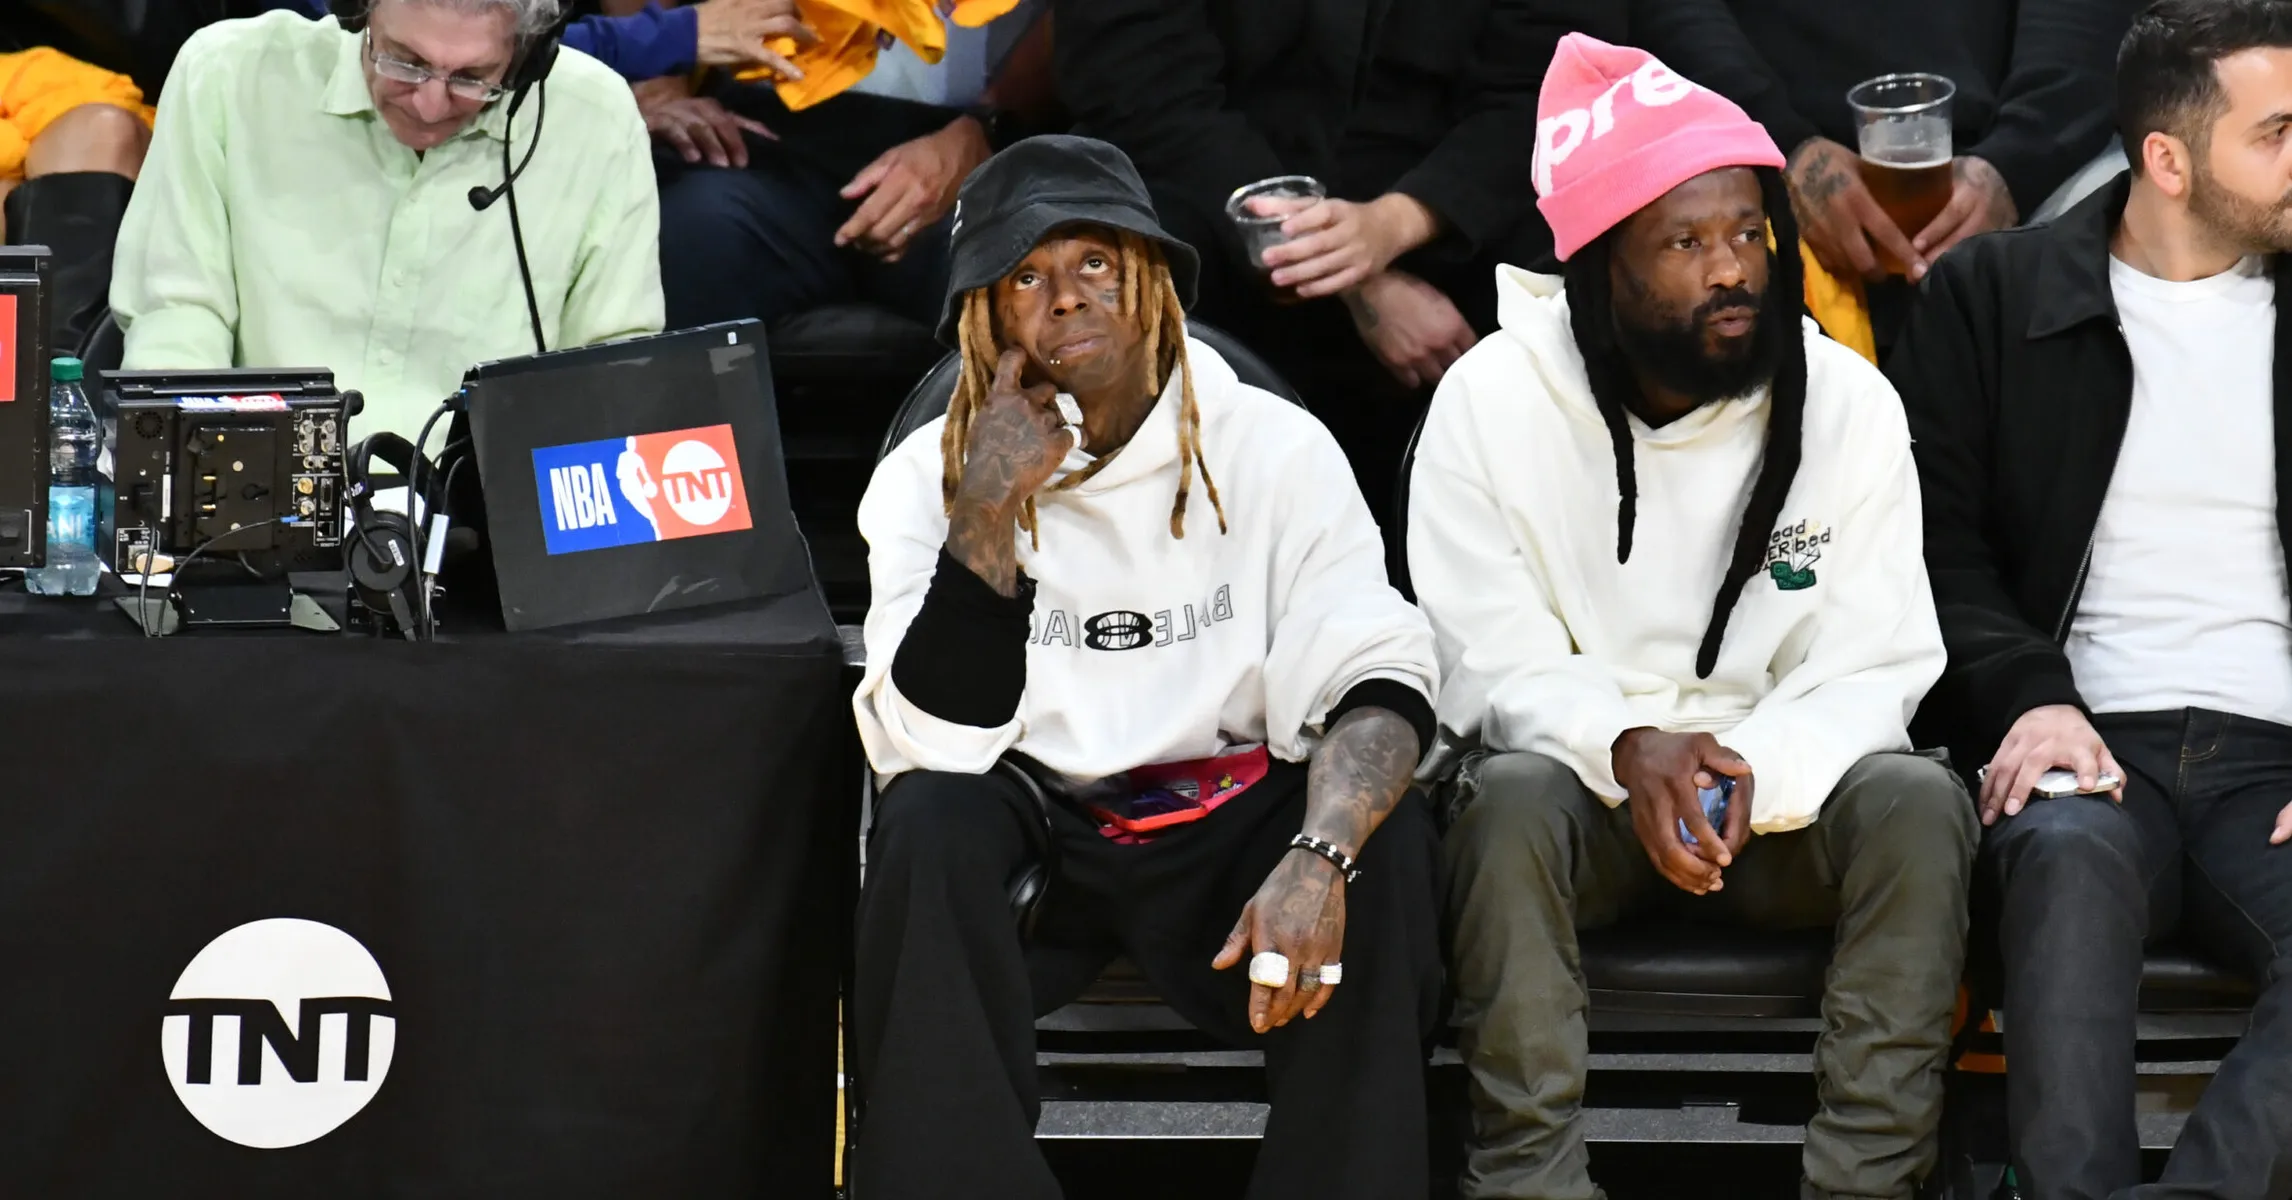 Lil Wayne Divulges On Drake Being With His Girl While In Jail In Pre-Kendrick Lamar Diss Interview